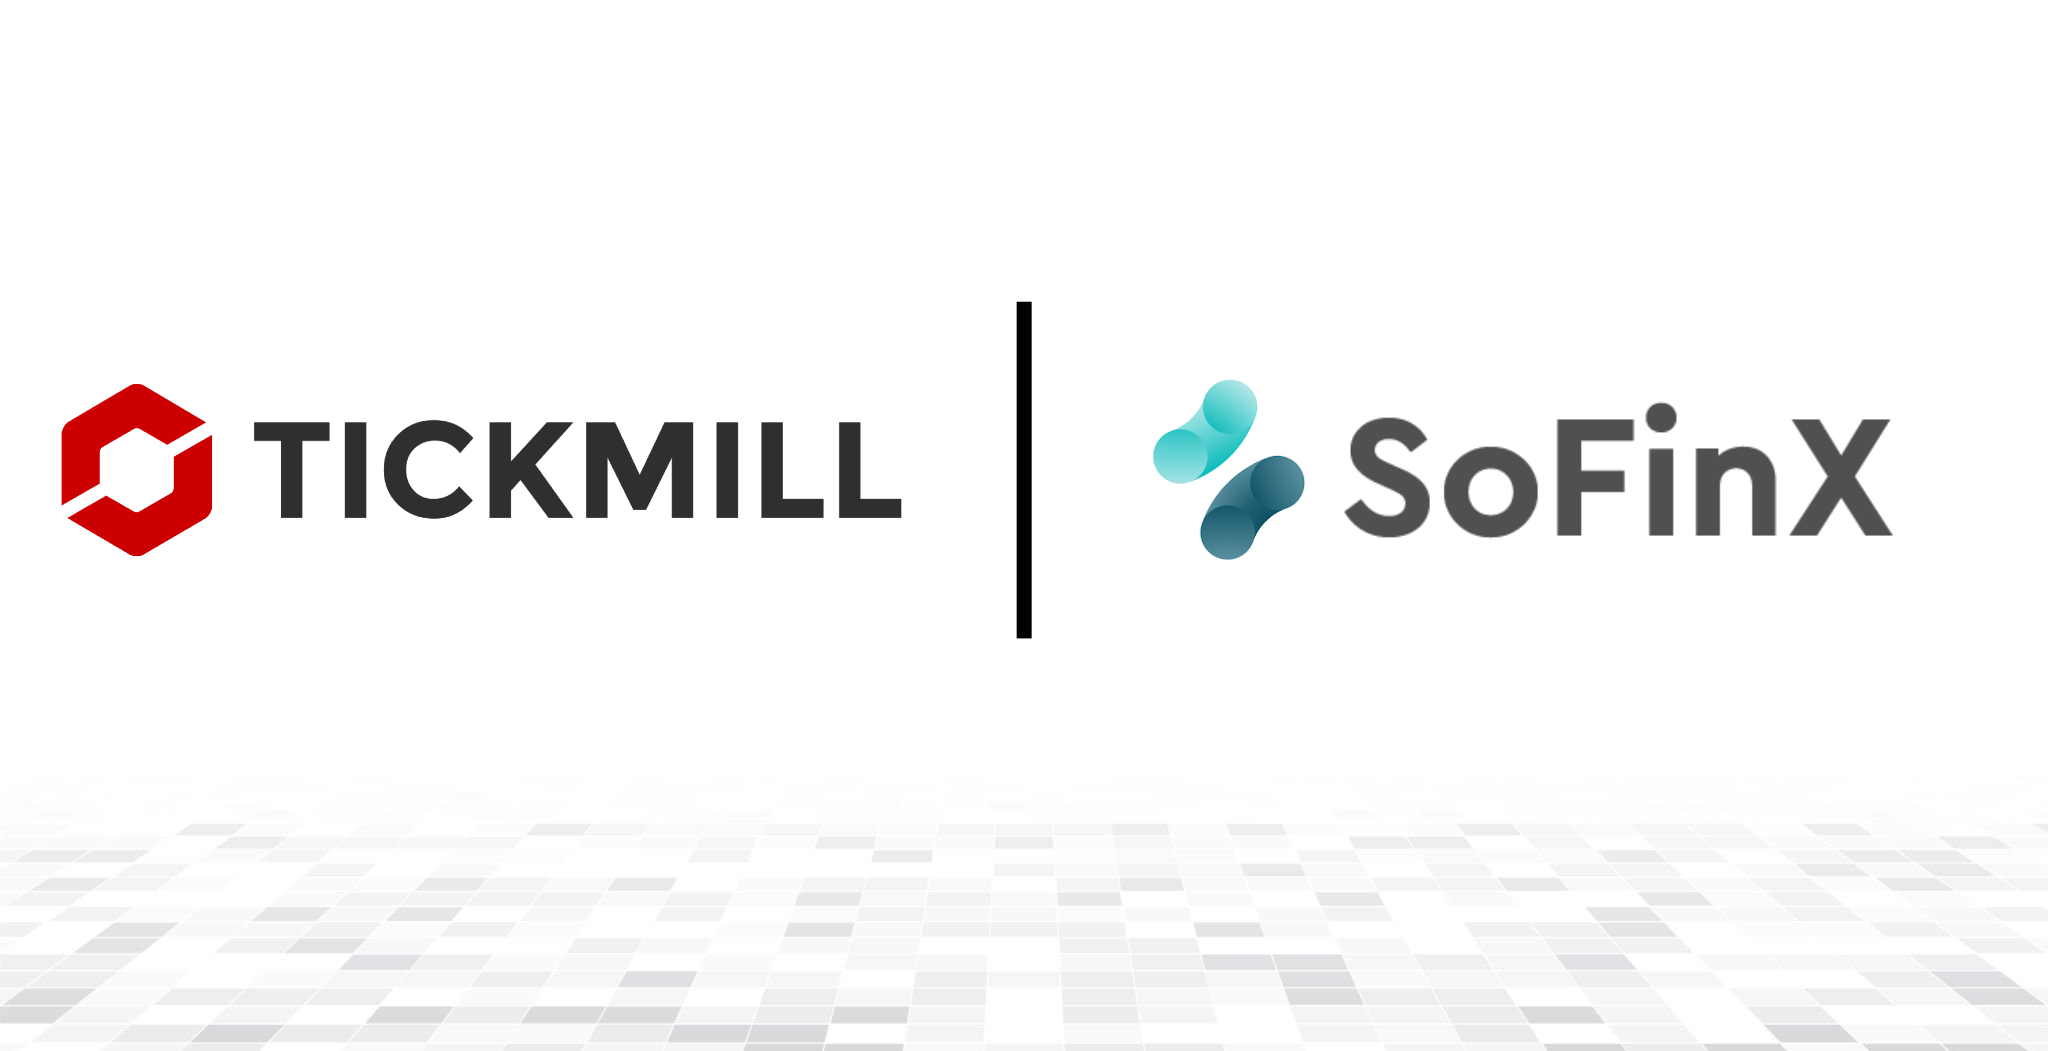 Tickmill has integrated SoFinX's social trading platform, allowing clients to copy trades from over 10,000 signal providers for enhanced copy trading experience.